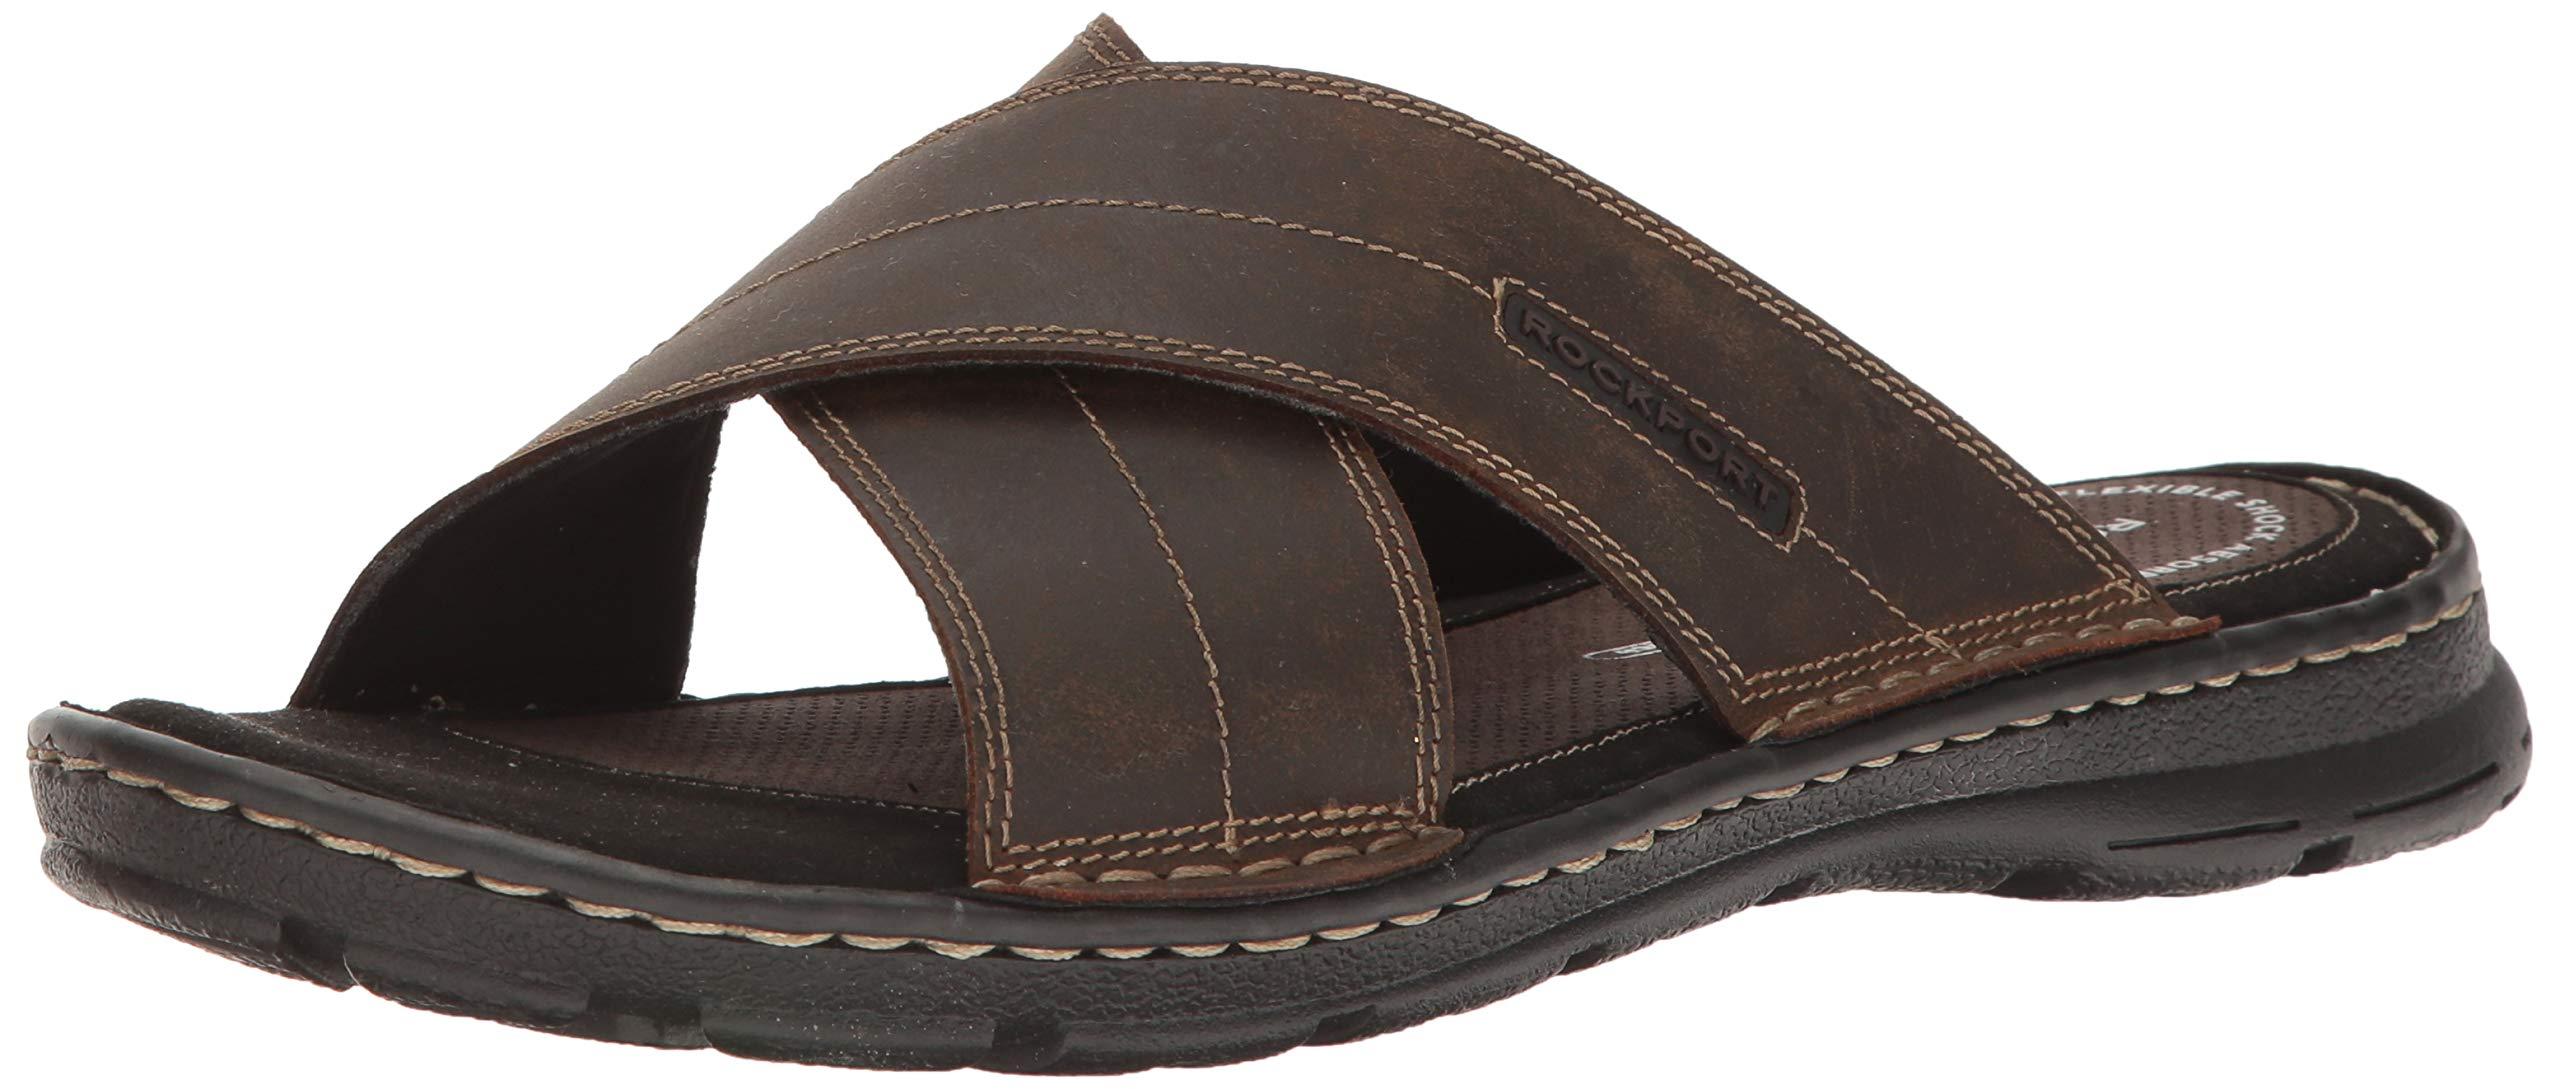 Rockport Leather Darwyn Xband in Brown ii Leather (Brown) for Men - Save  22% - Lyst